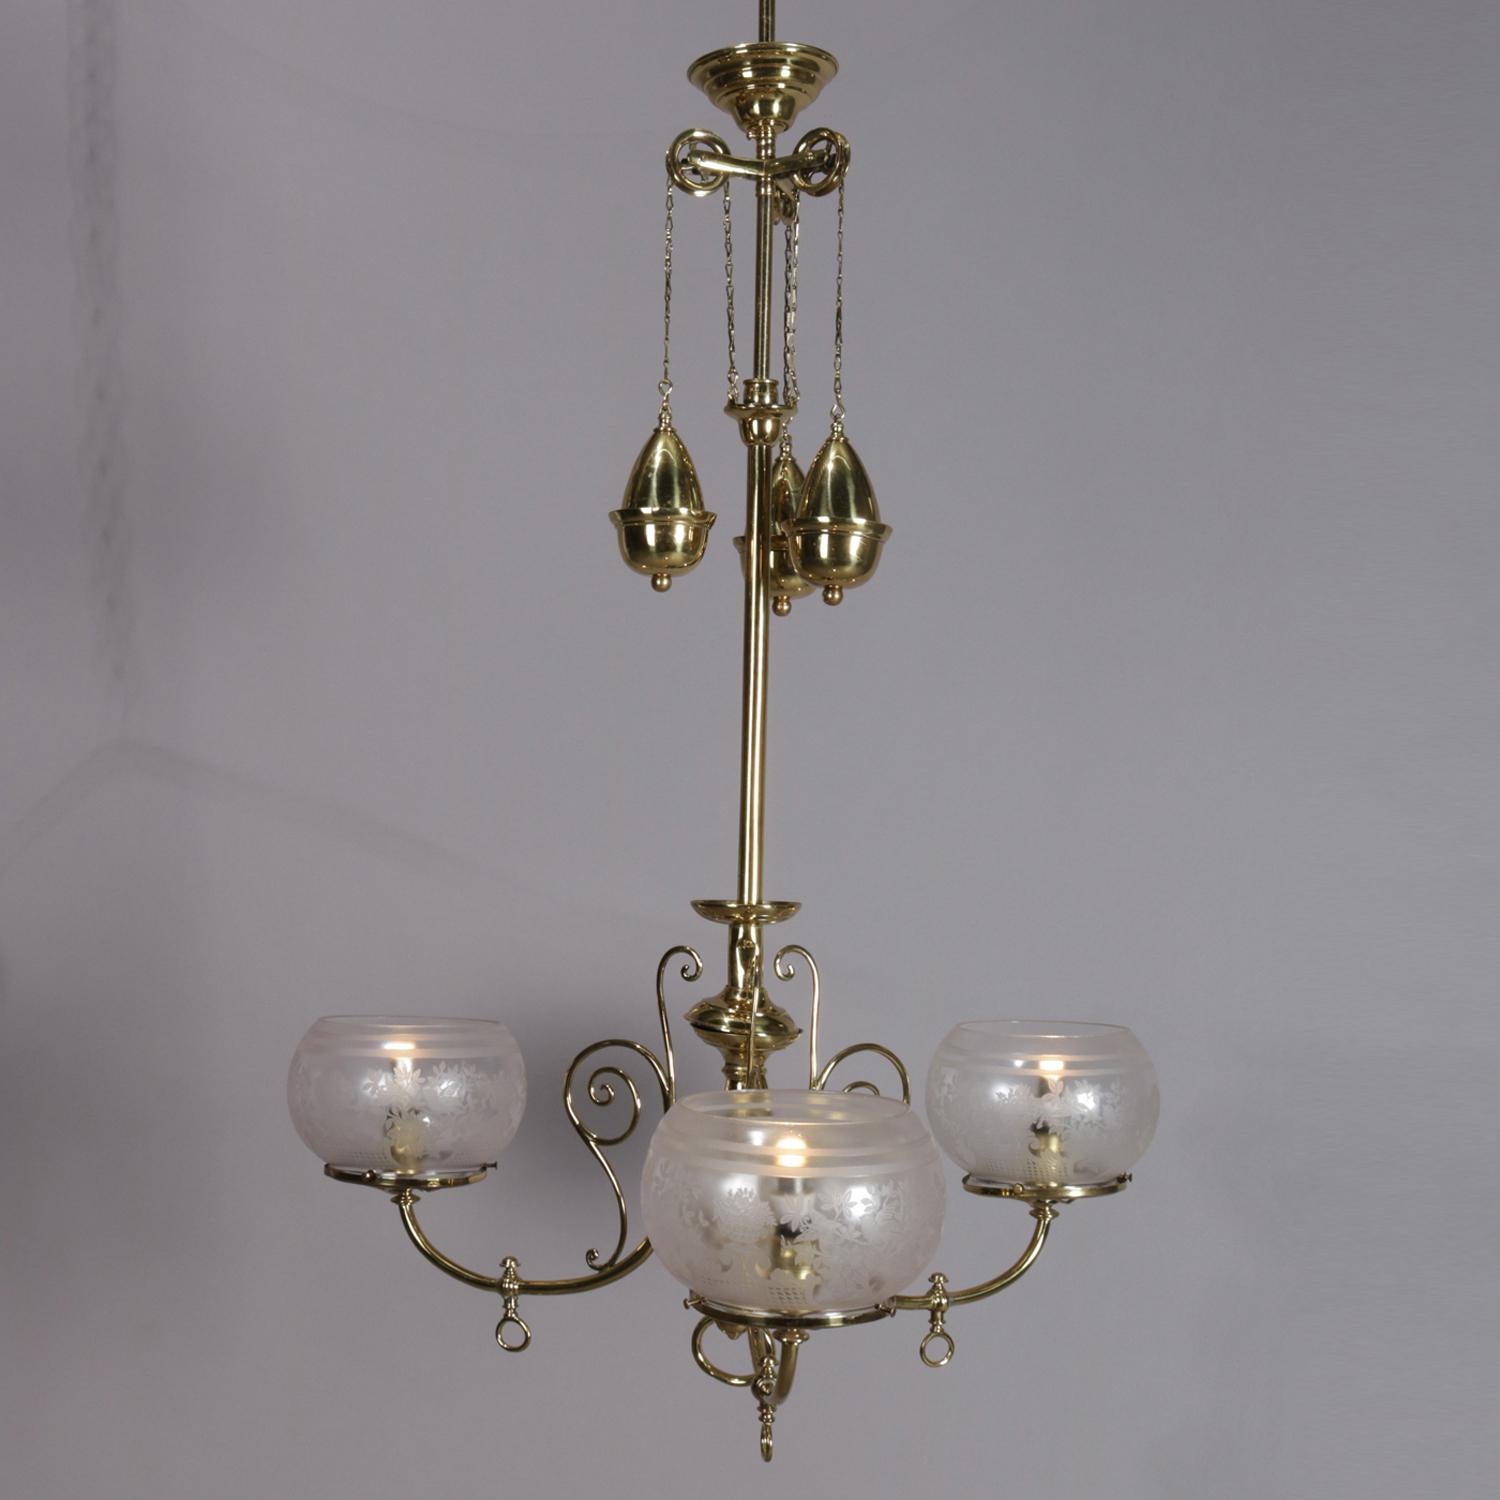 Antique Victorian electrified gas chandelier features brass frame with three c-scroll arms having scroll decoration and terminating in foliate etched bowl form glass shades, weight driven height adjustment, circa 1900

Measures: 44